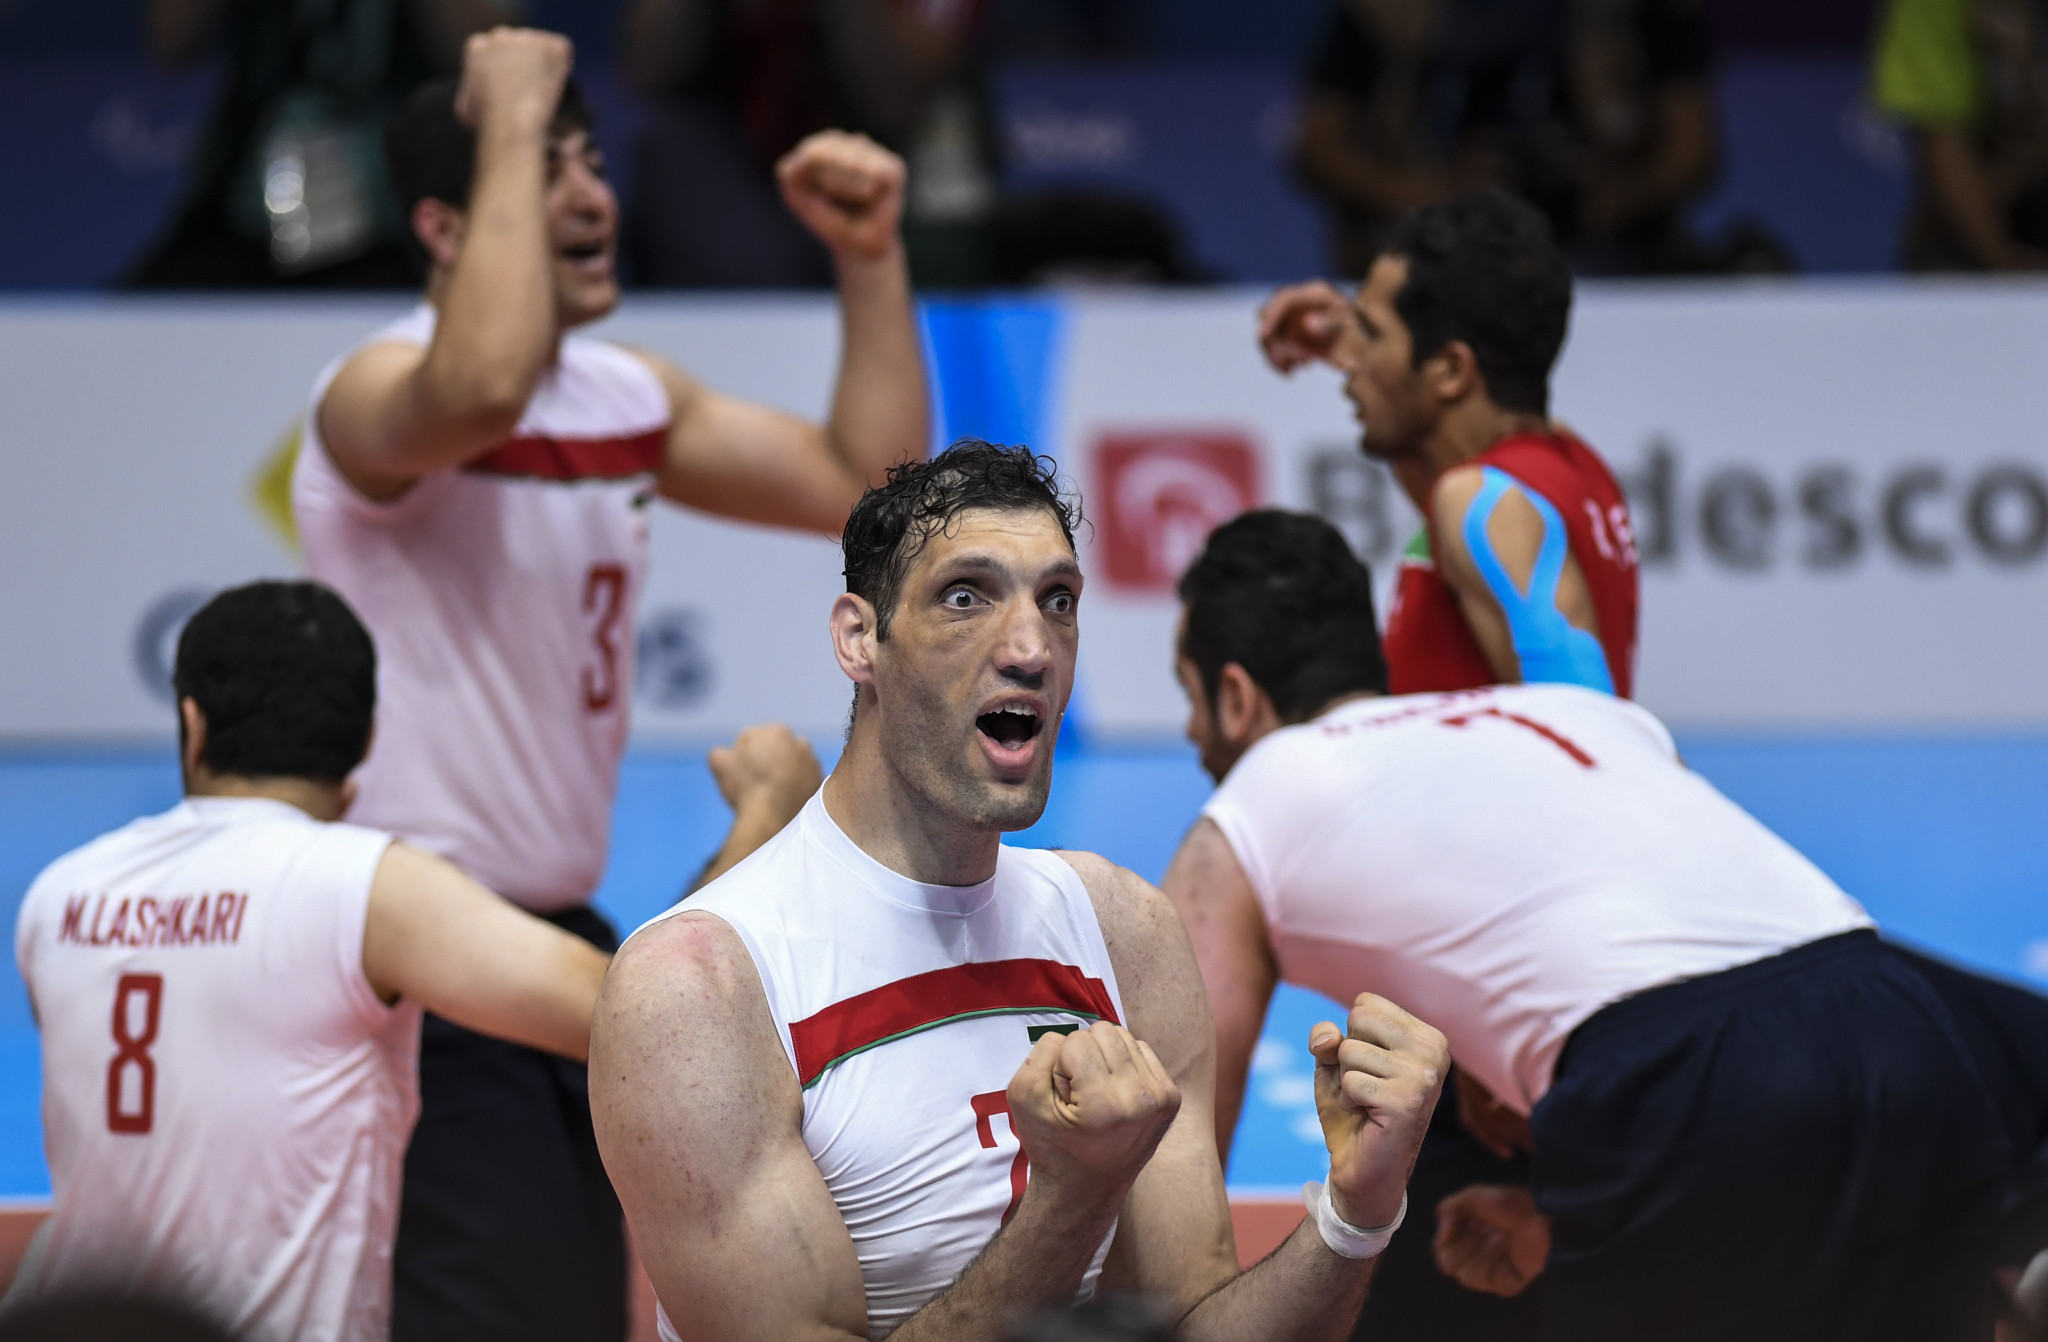 Reigning Paralympic champions Iran are among the nations to have already qualified for Tokyo 2020 ©Getty Images